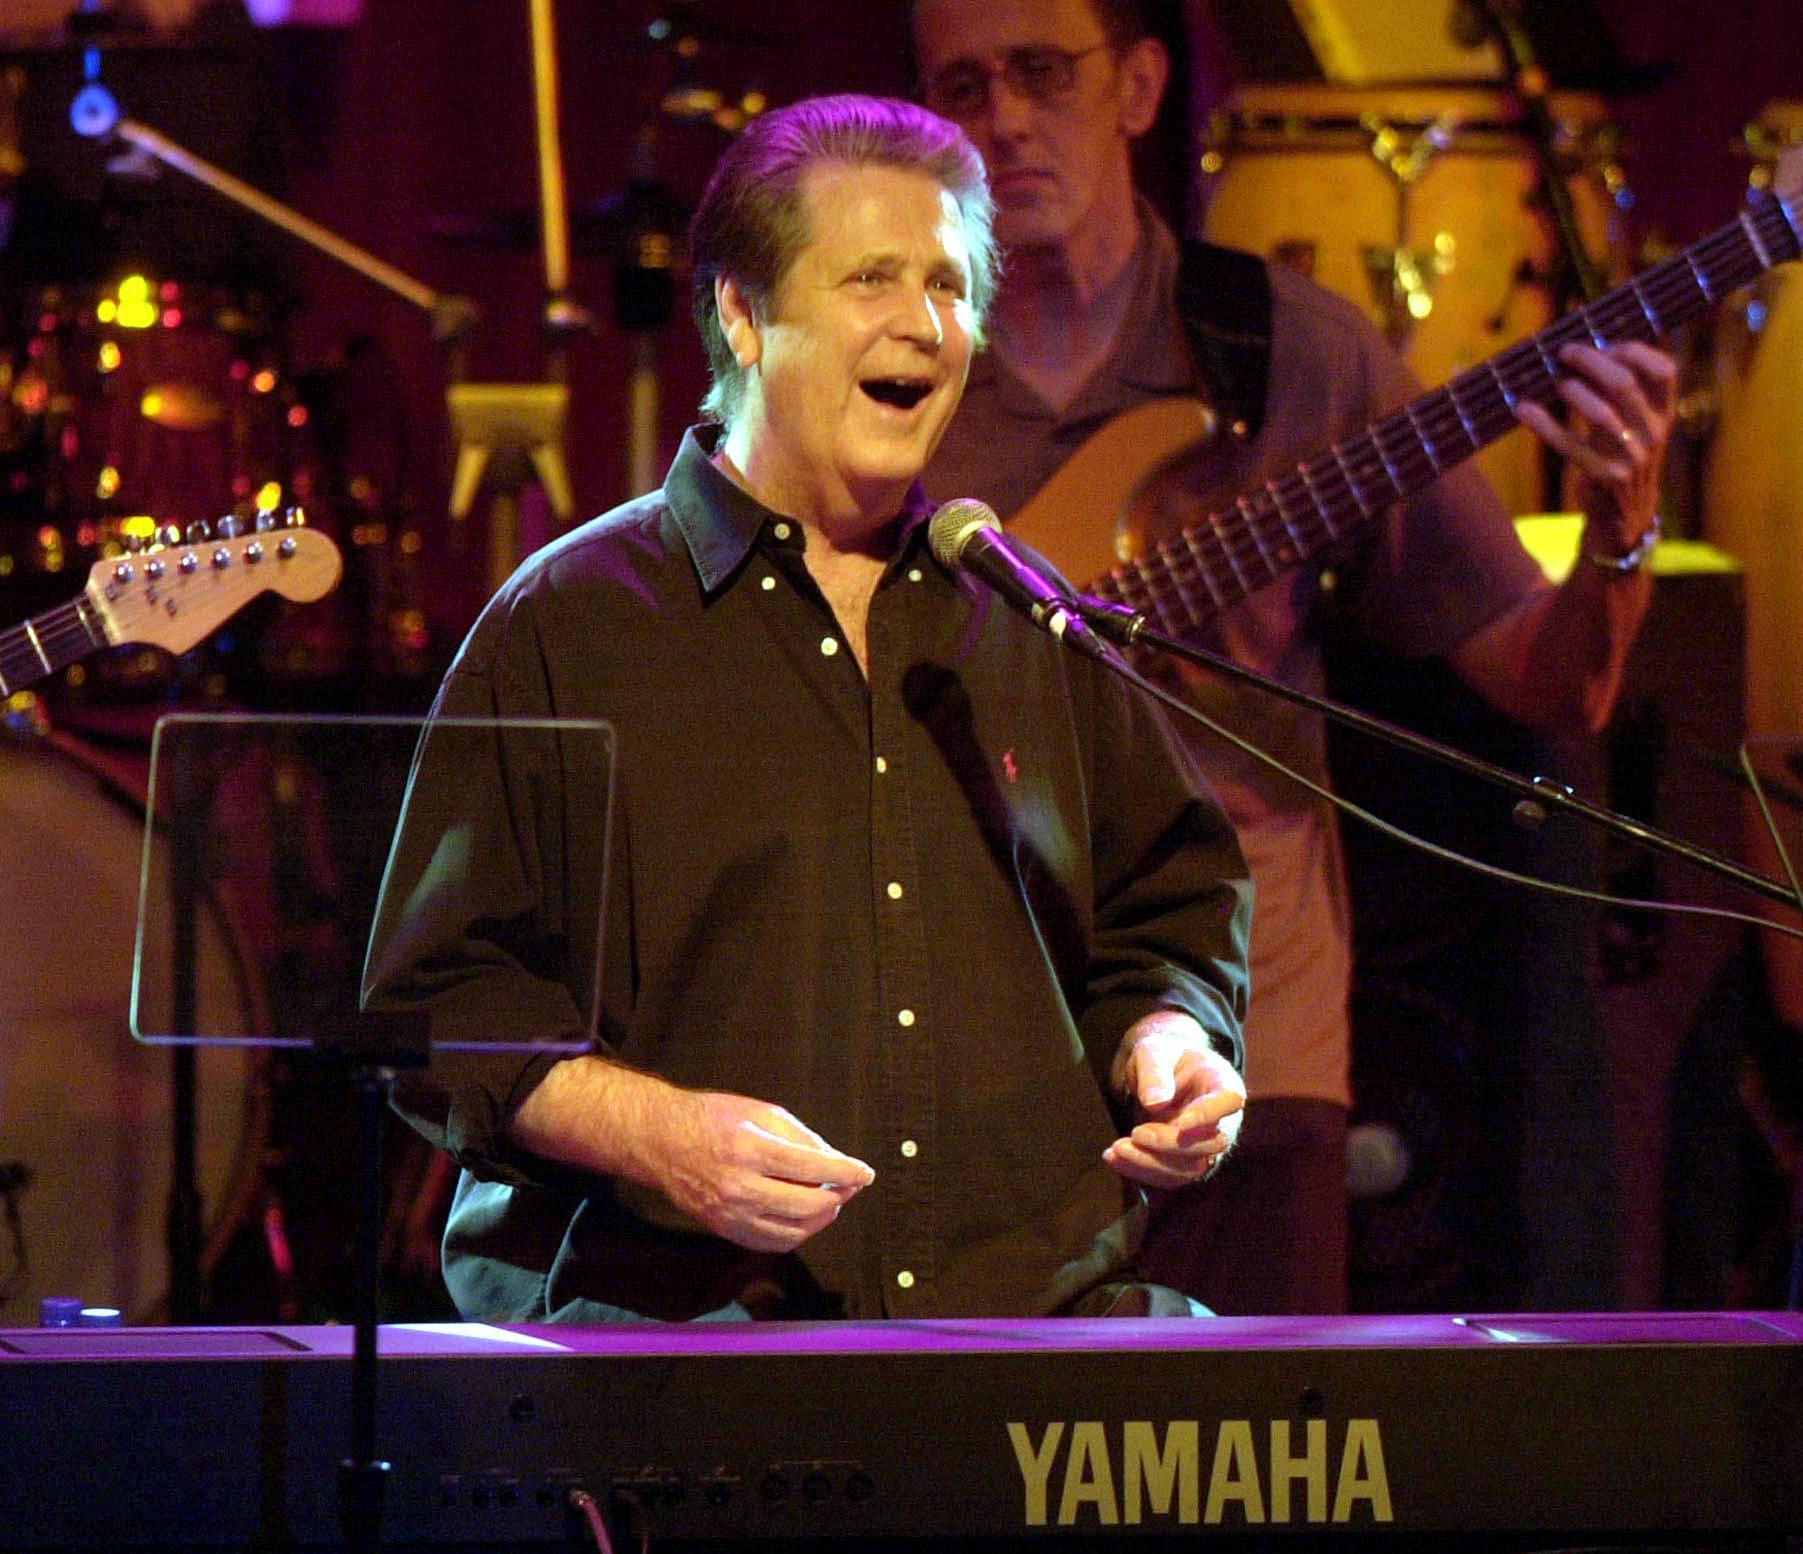 Brian Wilson performs during the 4th annual Carl Wilson Foundation Benefit Concert at the El Rey Theatre October 14, 2001 in Los Angeles, California.